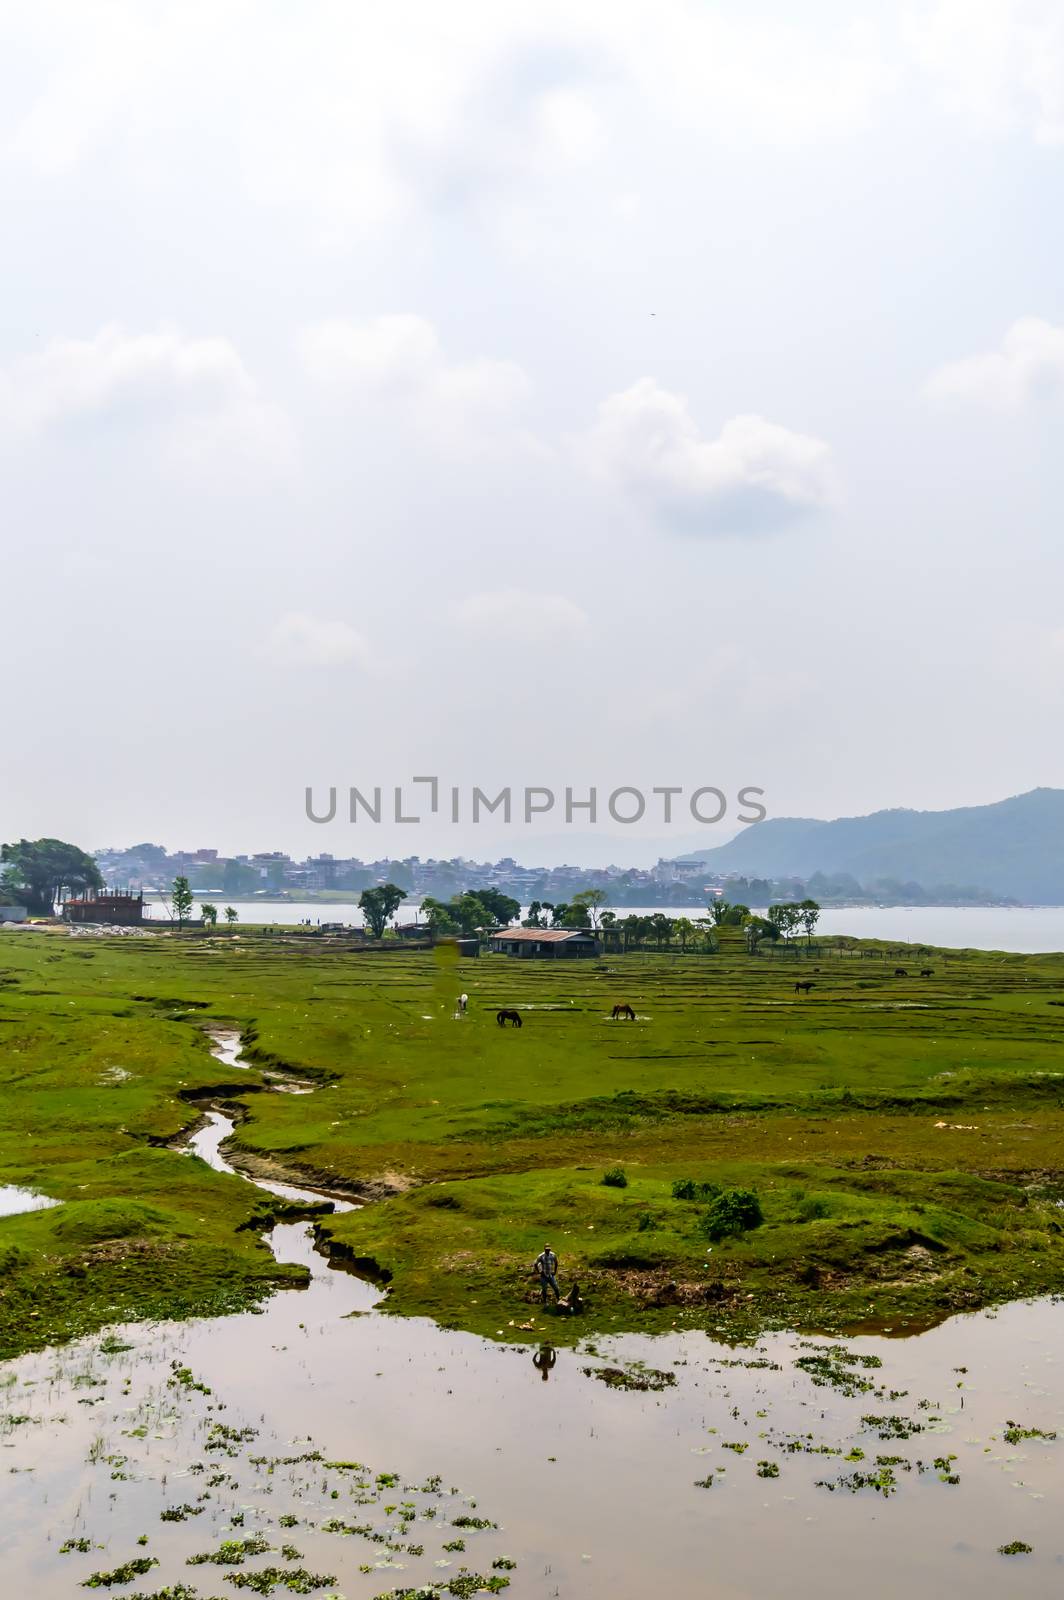 Photograph of beautiful summer landscape on the Shore of Pokhara Lake at Kathmandu Nepal. Snap in portrait, landscape, wide screen style. Vintage film look. Vacation Freedom, Simplicity Concept. by sudiptabhowmick